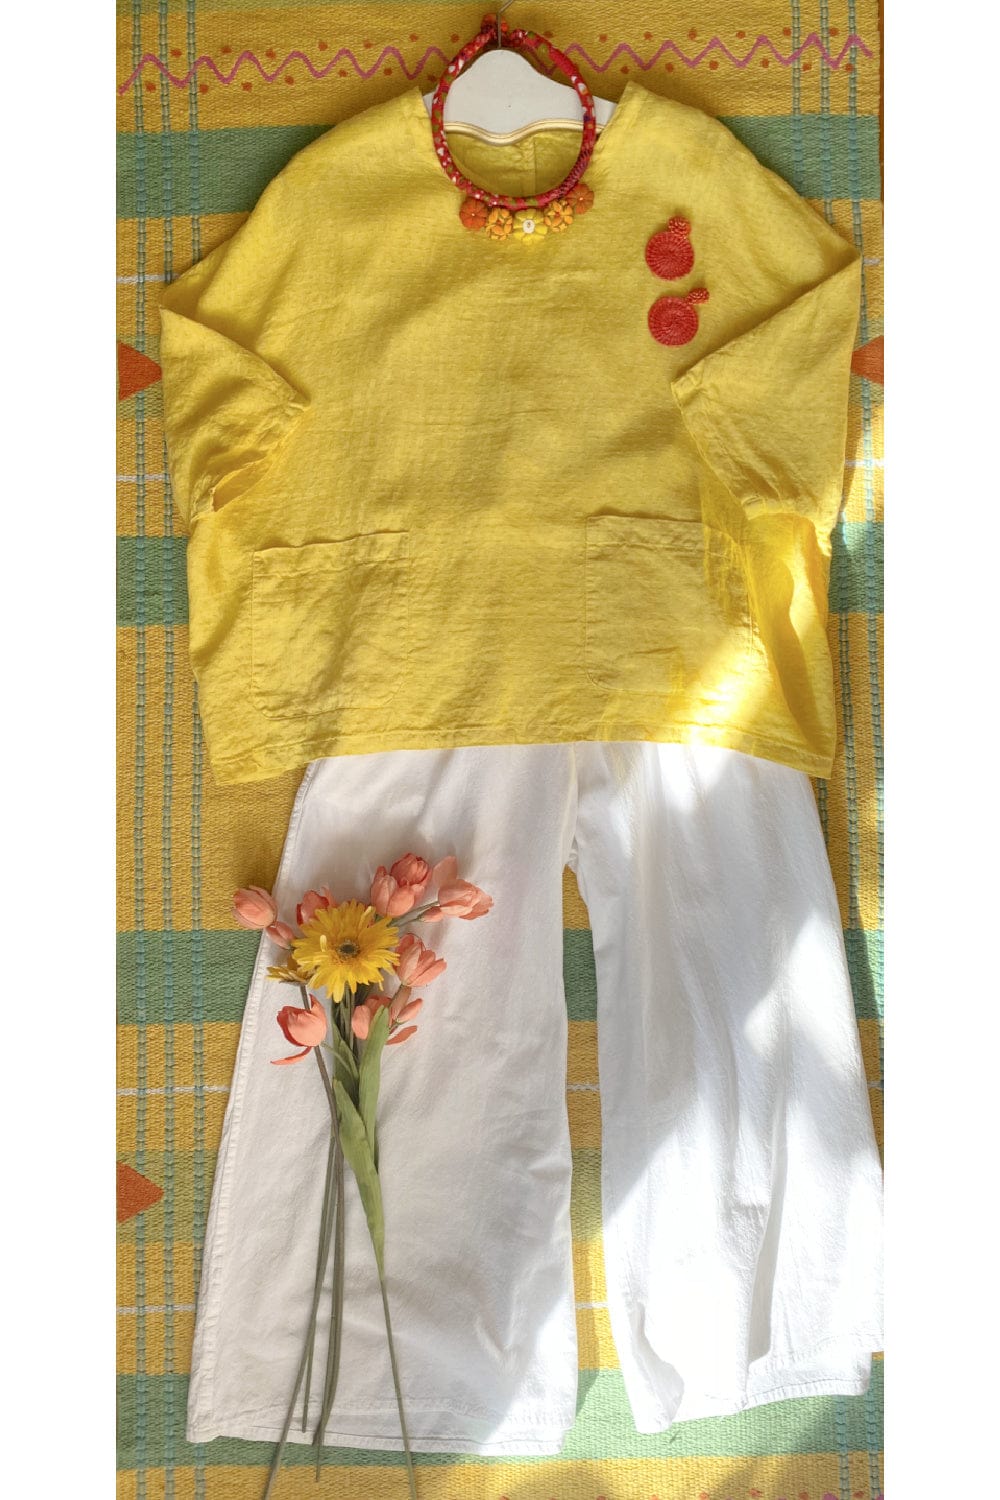 Pretty textile necklace is soft reds and yellows styled with a yellow boxy linen top and full cut white cotton pants.